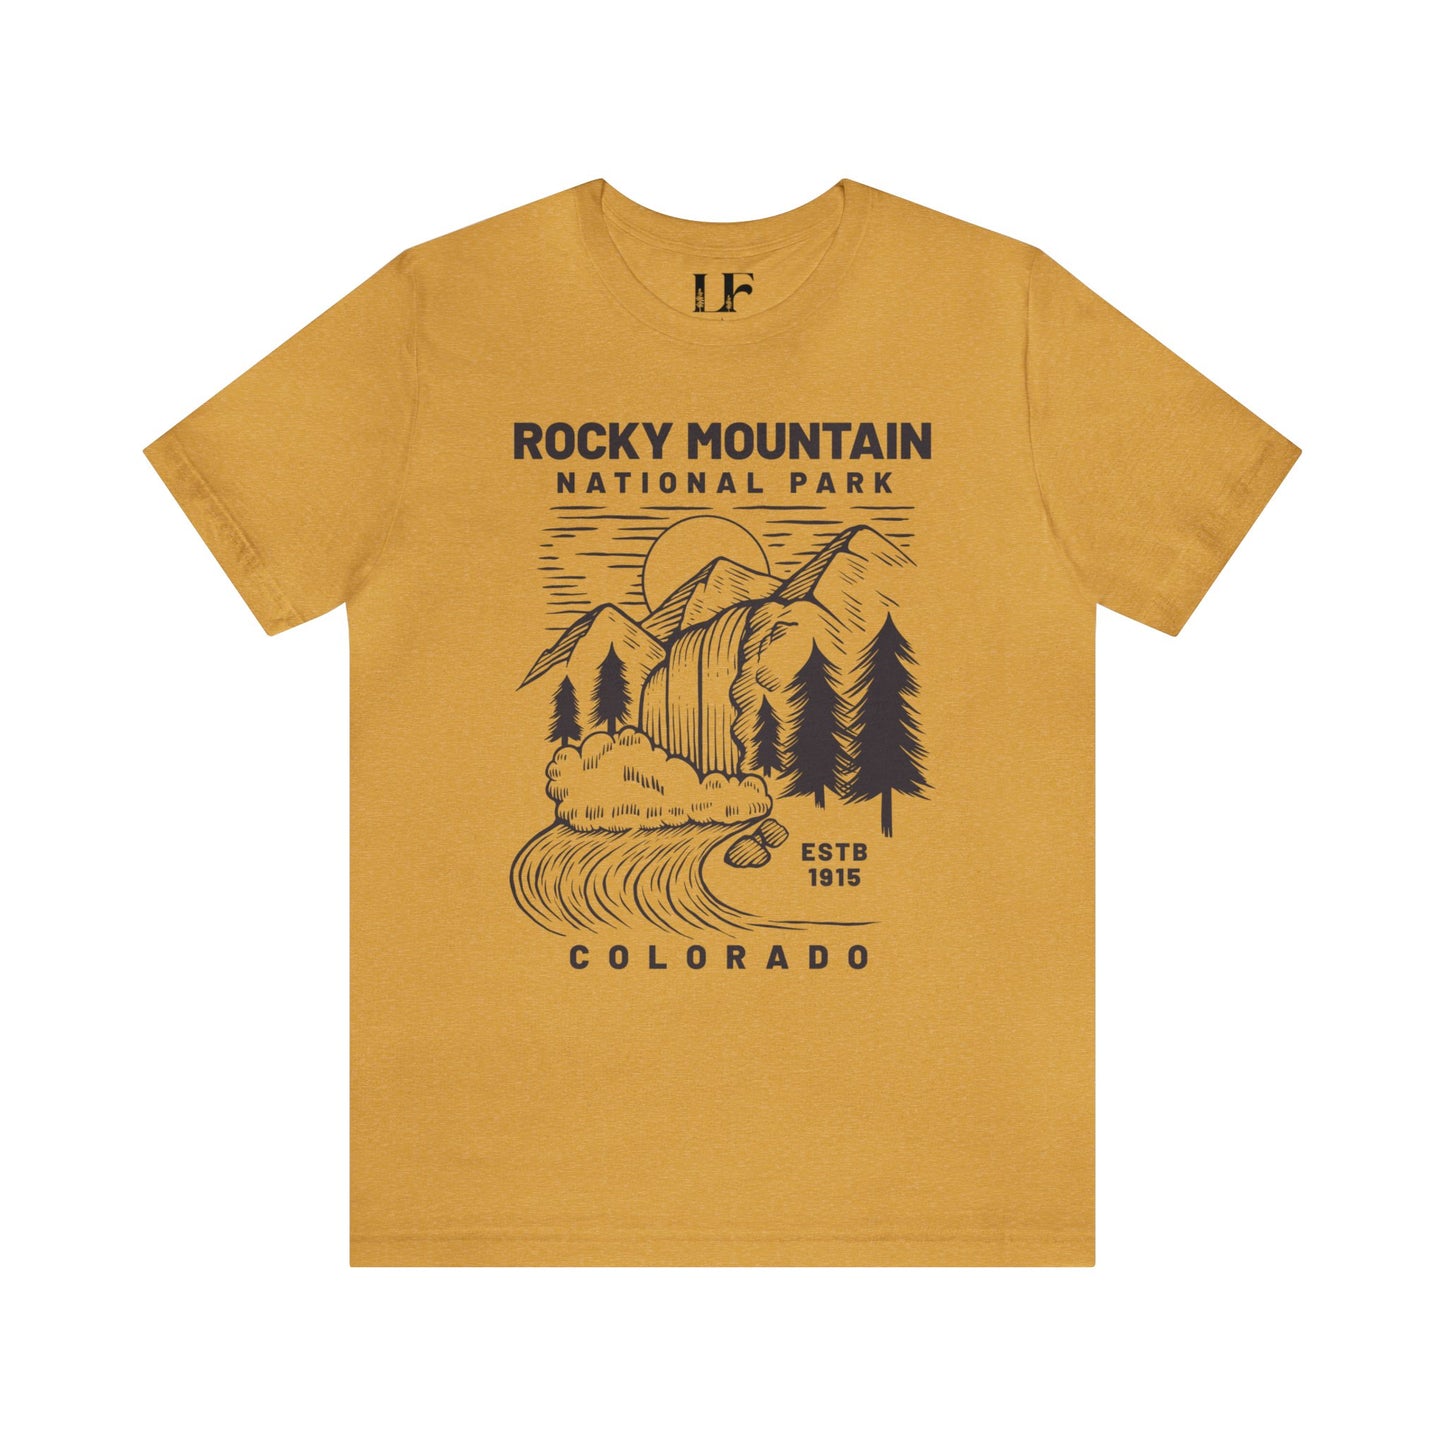 Rocky Mountain National Park ShirtBring the beauty of Rocky Mountain National Park of Colorado into your wardrobe with this simple waterfall and mountain landscape lightweight t-shirt.
Details:
- 100